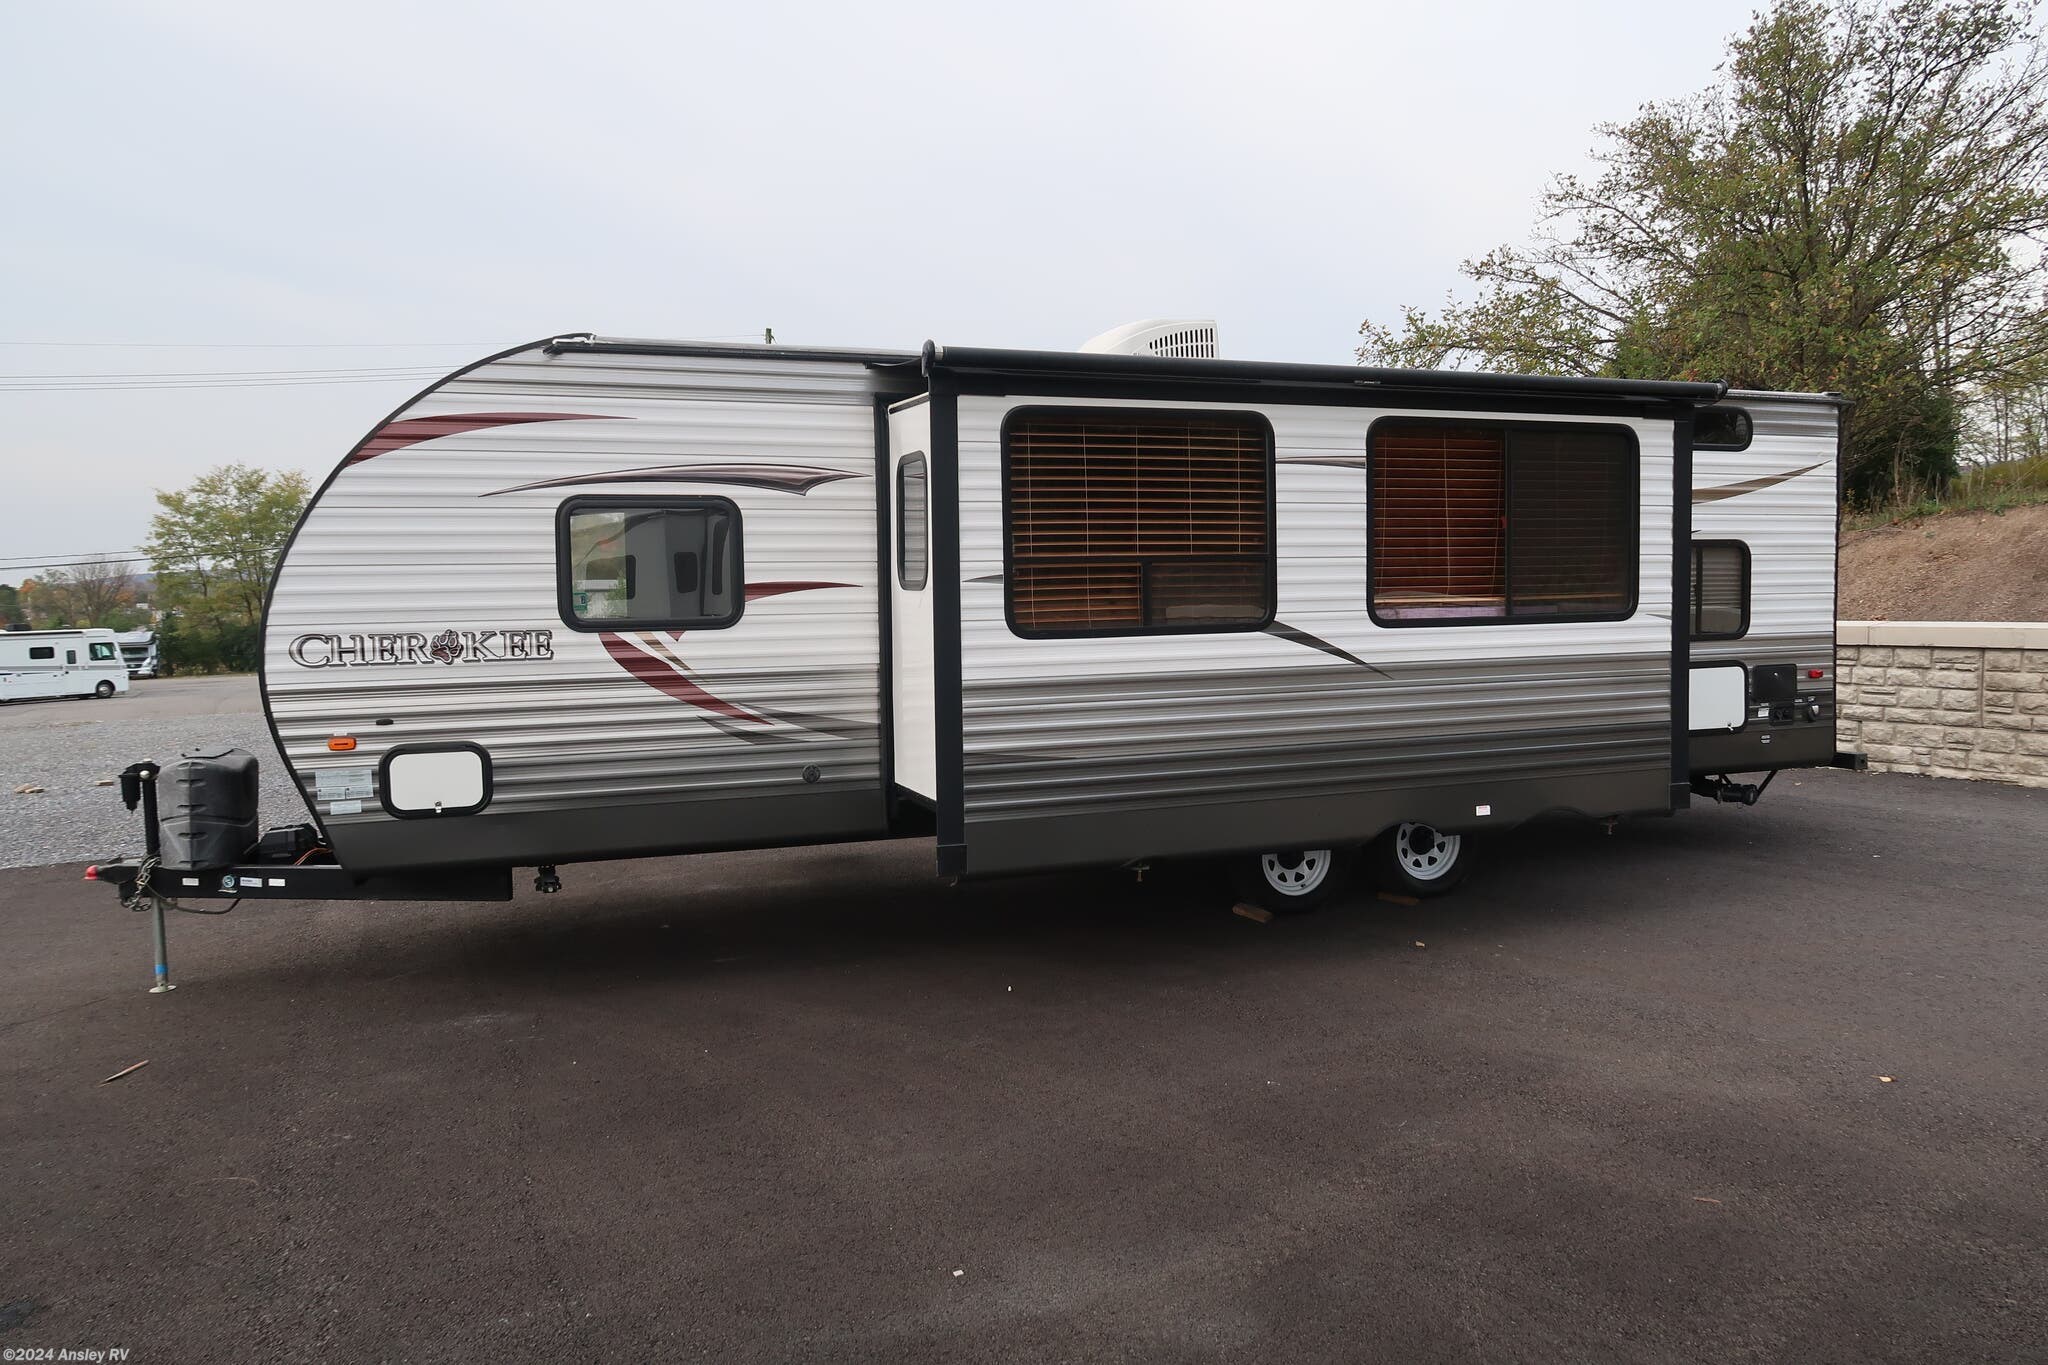 2015 Forest River Cherokee 274dbh Rv For Sale In Duncansville Pa 16635